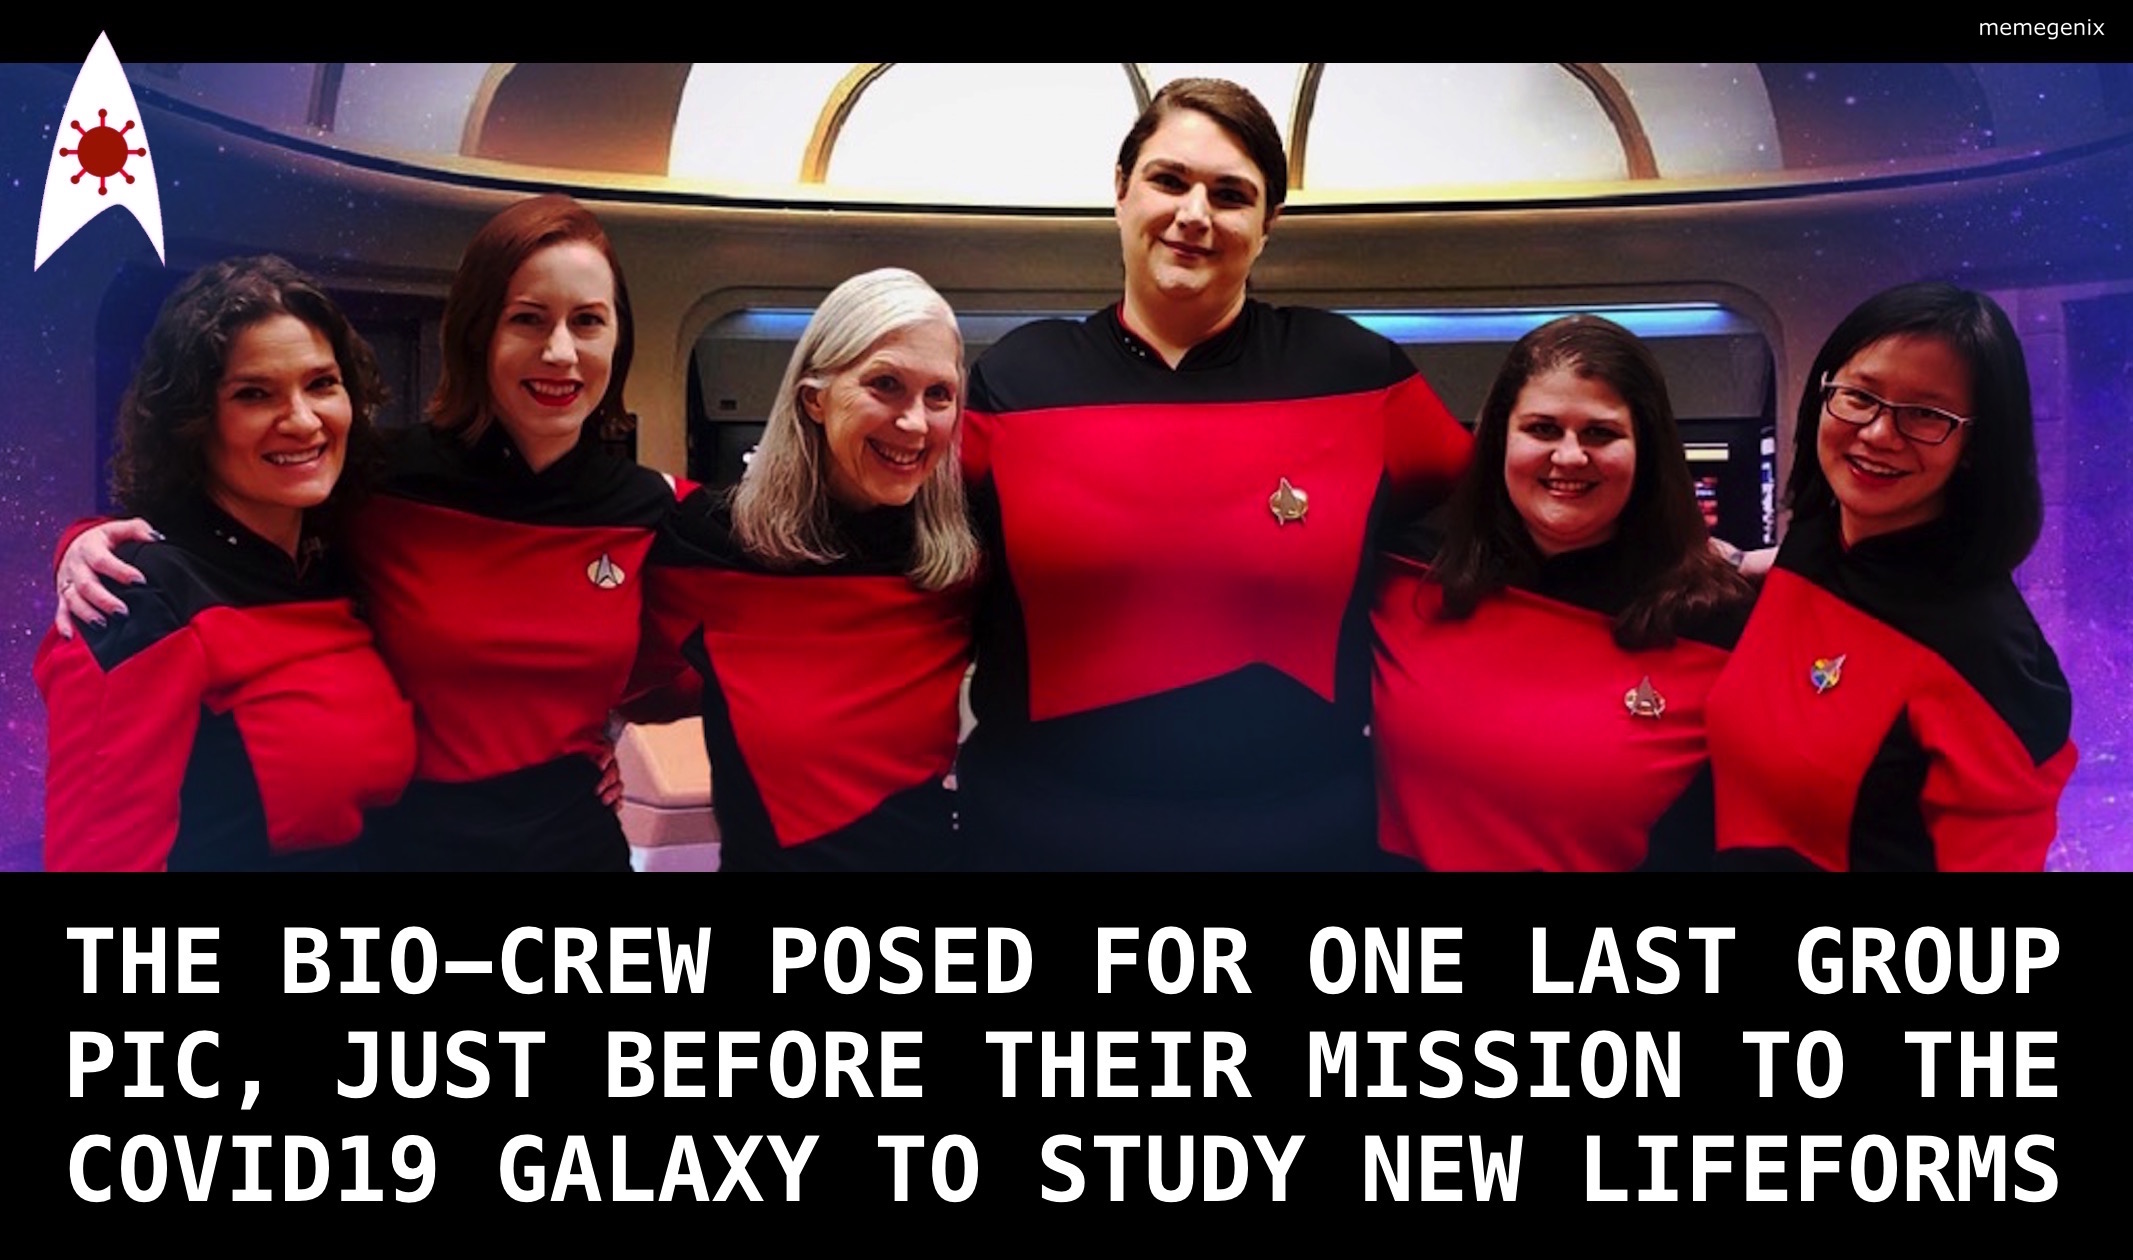 THE-BIO-CREW-POSED-ONE-LAST-PIC-BEFORE-THEIR-MISSION Blank Meme Template